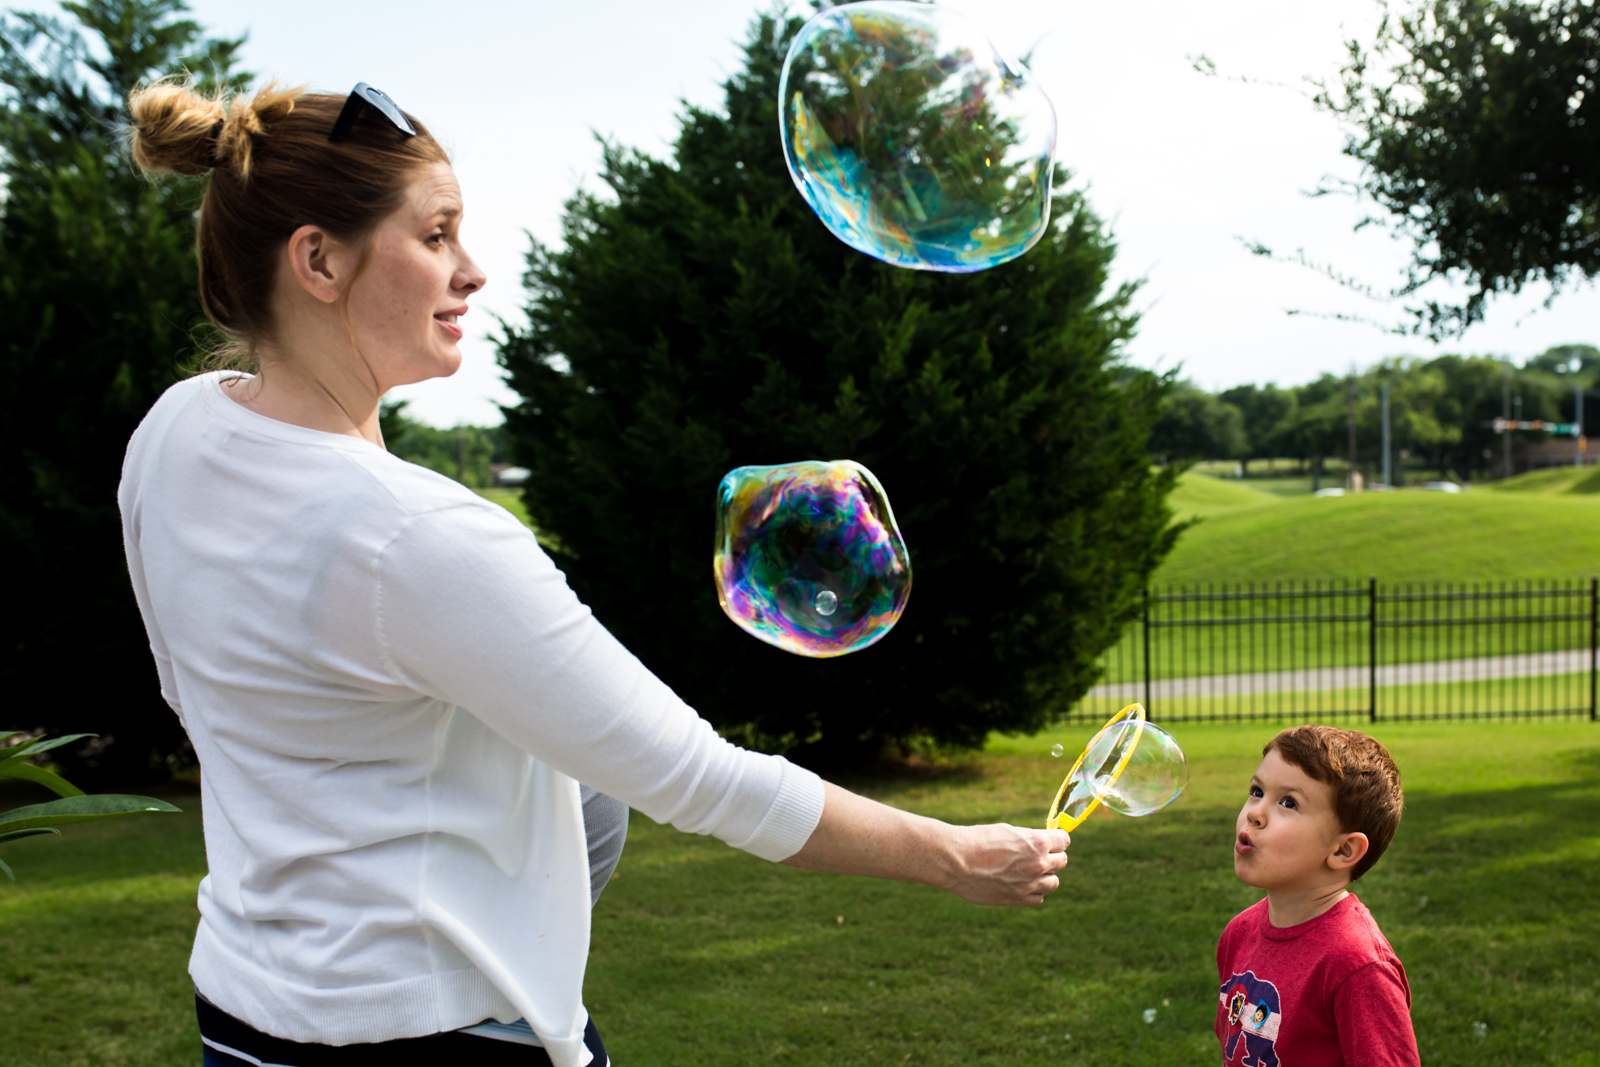 Lawren Rose Photography takes a unique photograph of a pregnant Mom holding a bubble wand while her 4 year old son blows and looks up at the giant bubbles he is creating in McKinney Texas